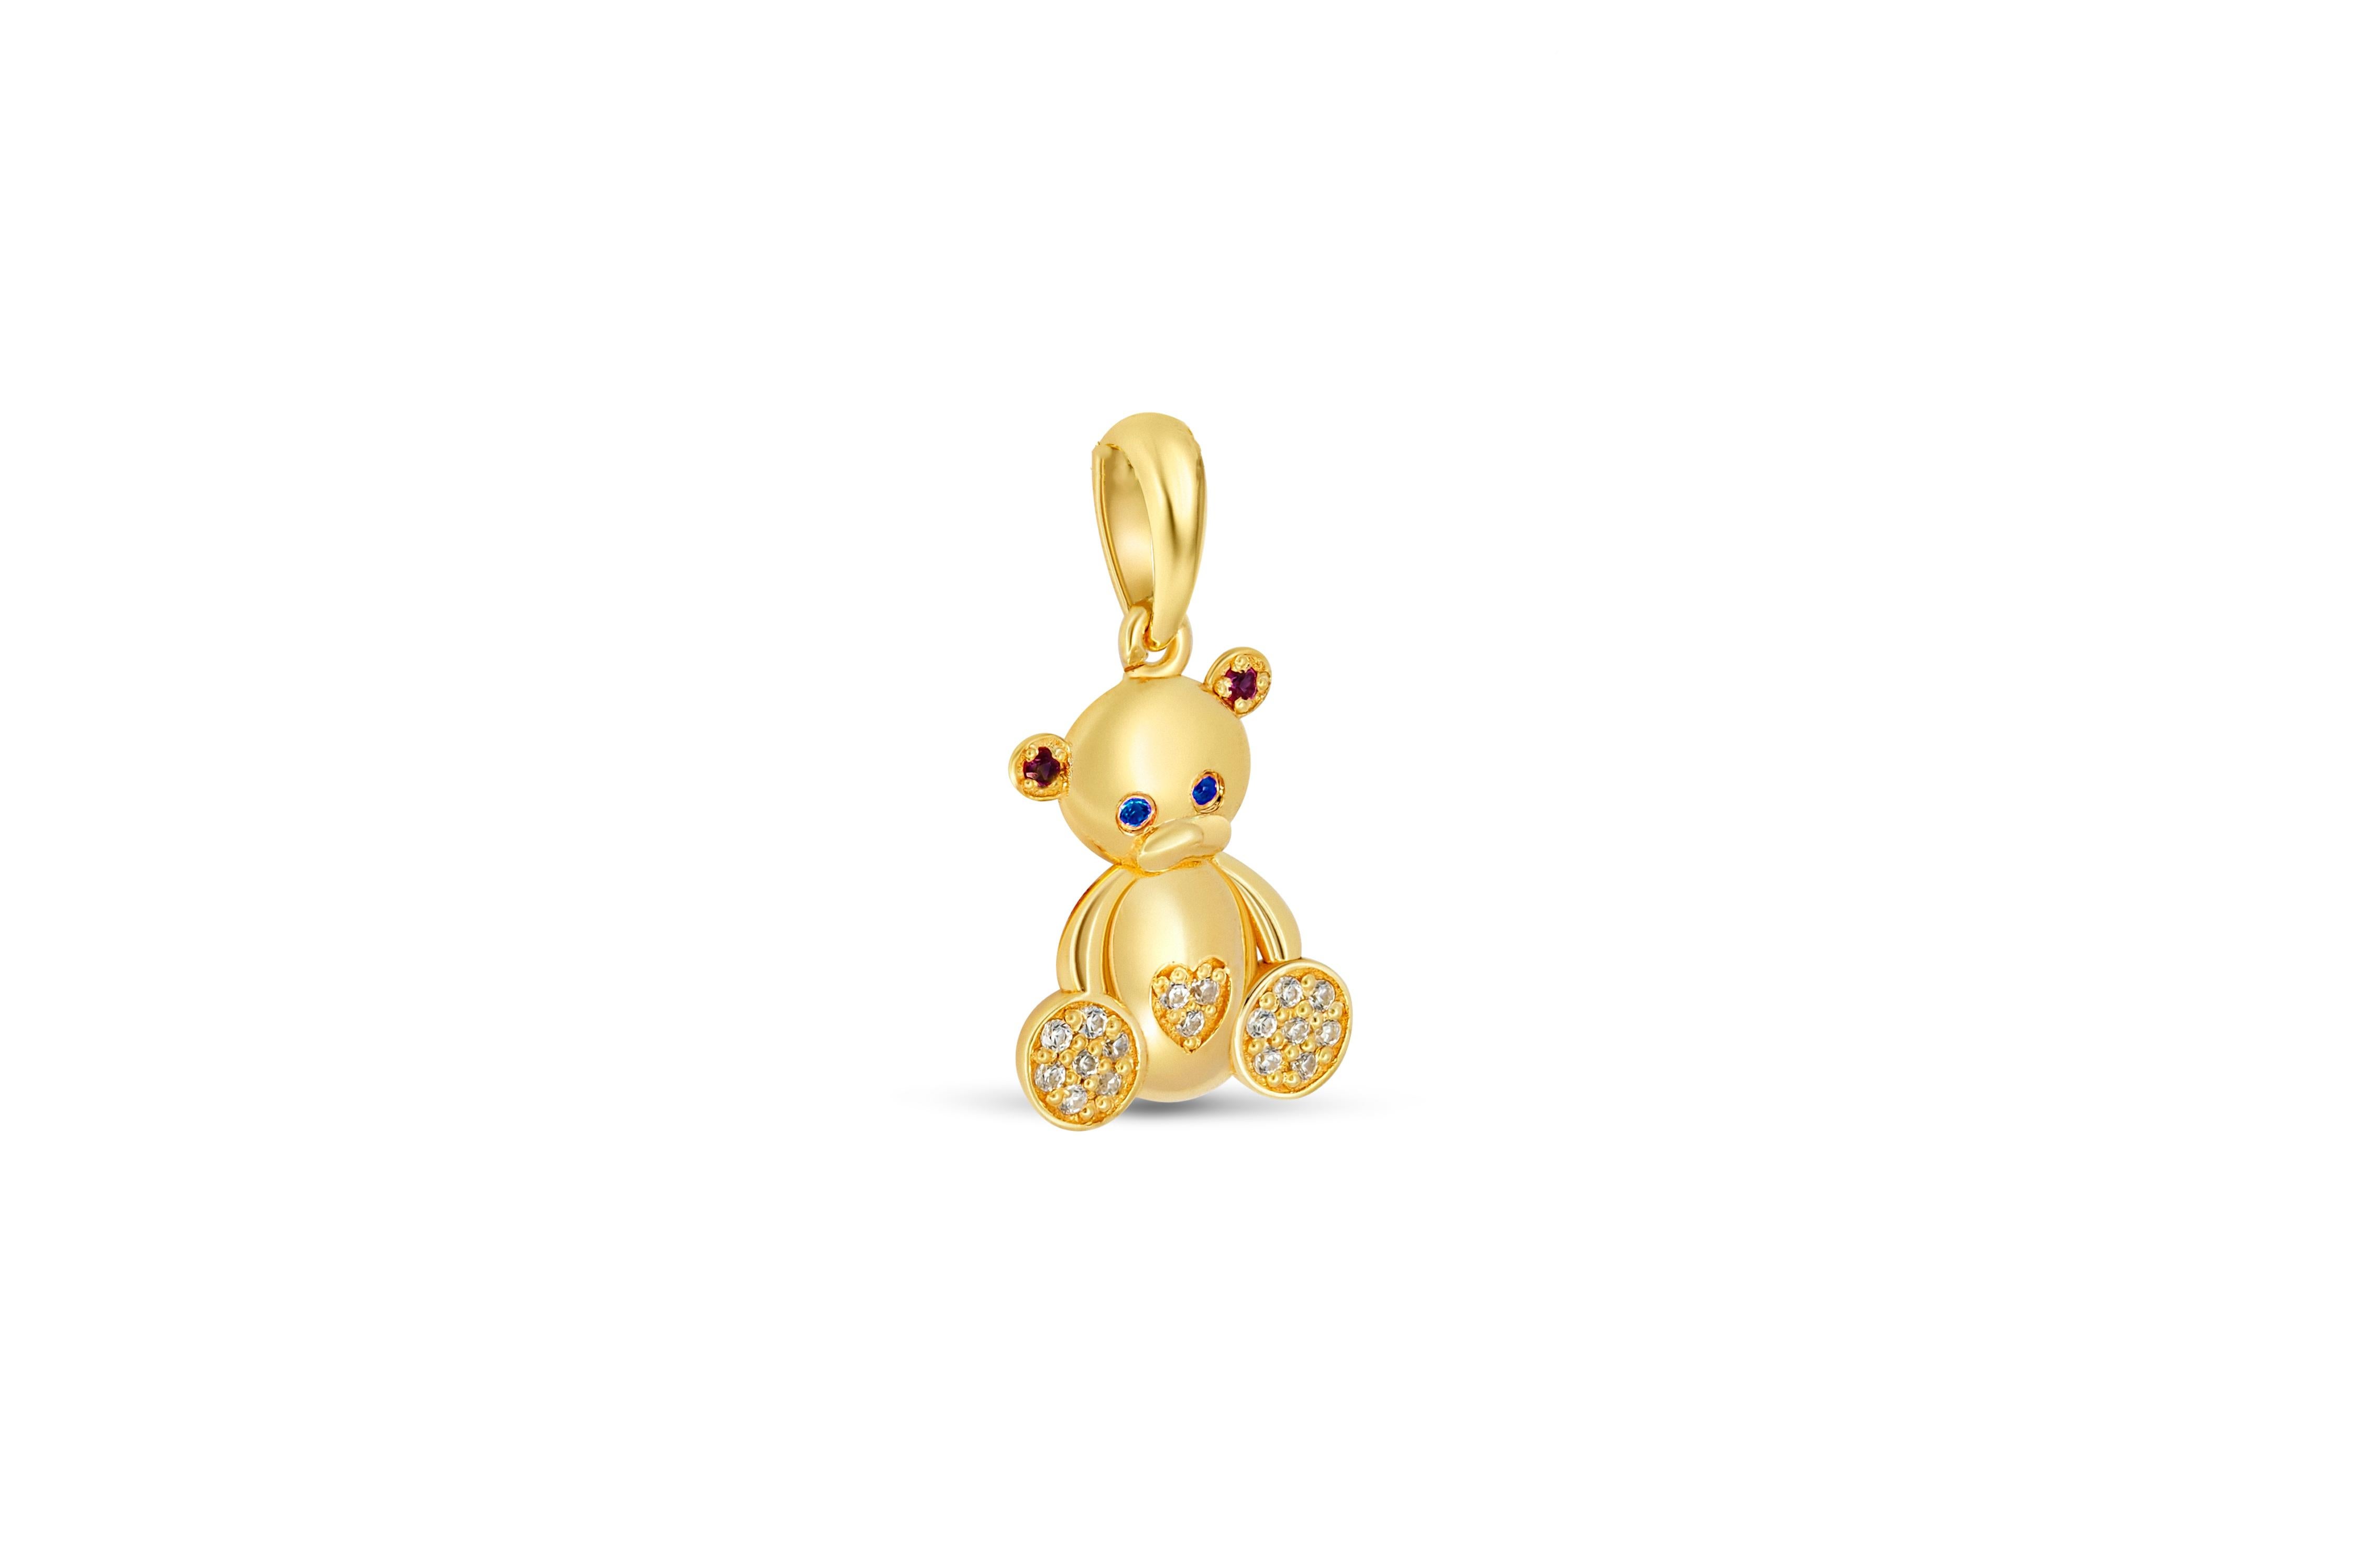 Round Cut Teddy bear pendant in 14k gold. For Sale